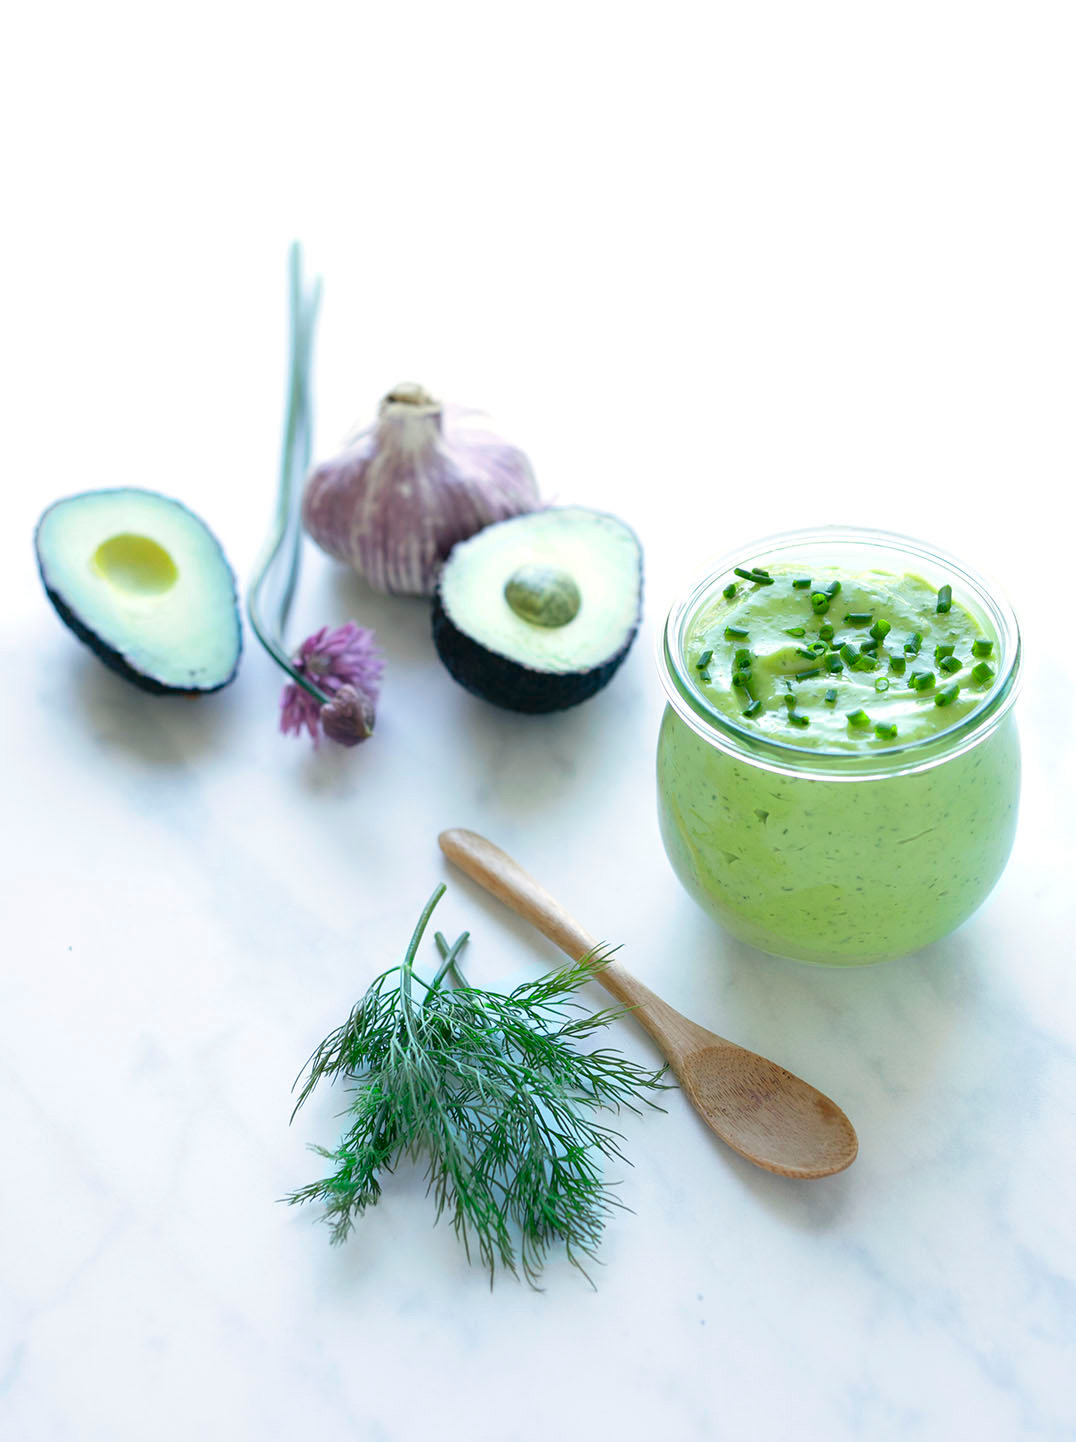 A jar of creamy green dressing topped with chive 2 halves of an avocado garlic dill a chive flower and wooden spoon